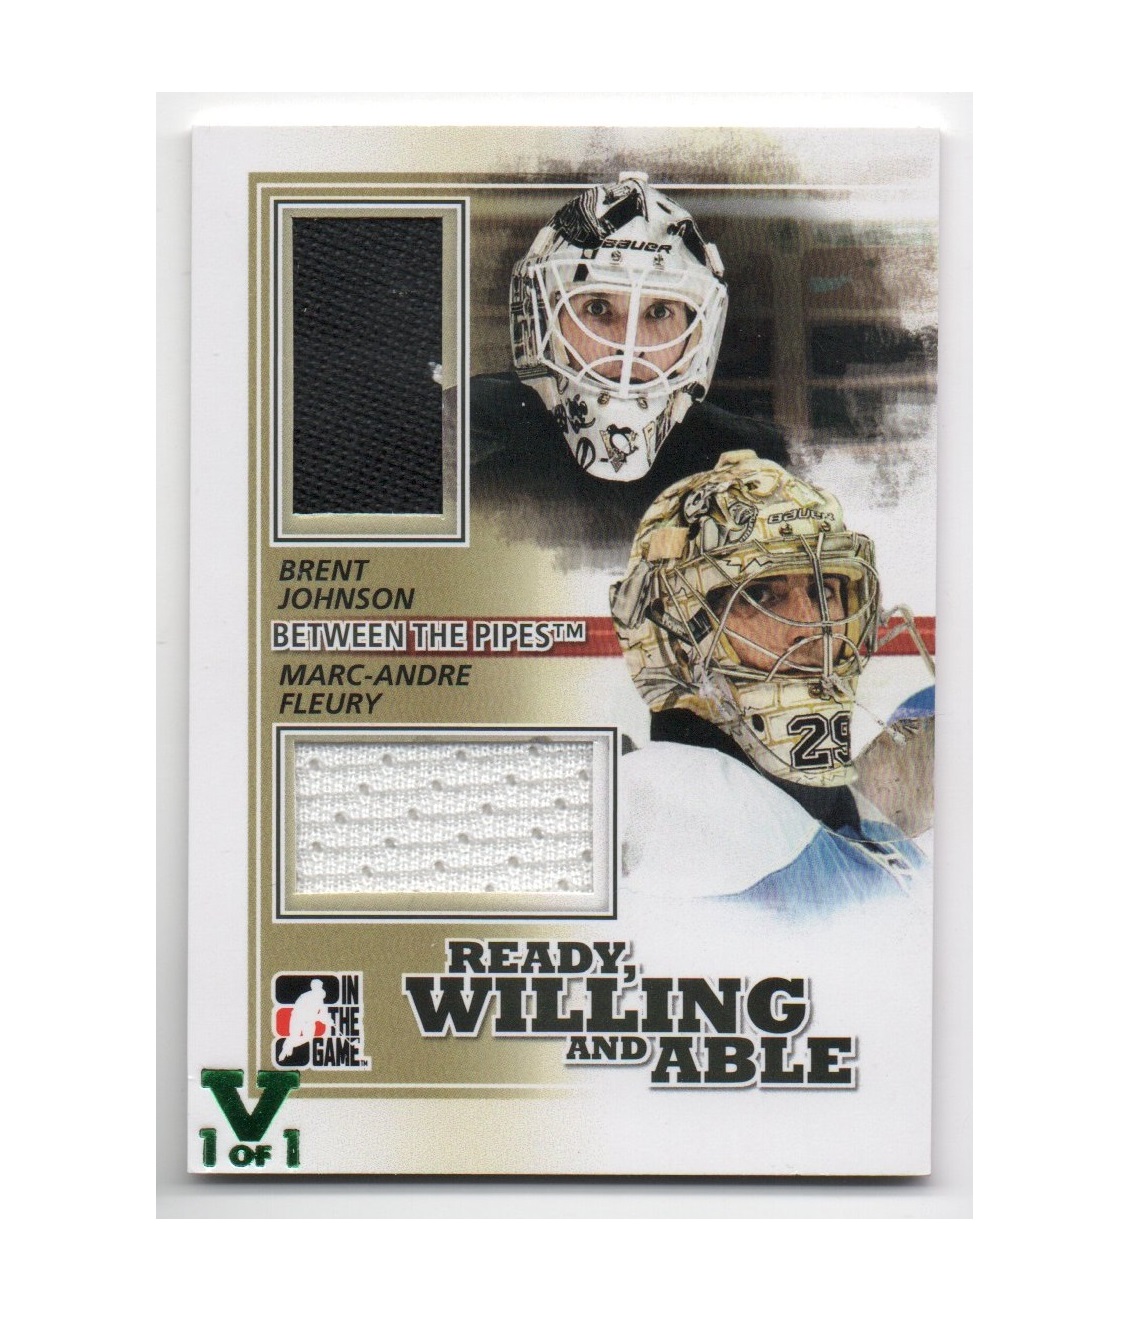 2010-11 Between The Pipes Ready Willing and Able Jerseys Black #RWA04 Marc-Andre Fleury Brent Johnson (150-X154-PENGUINS)